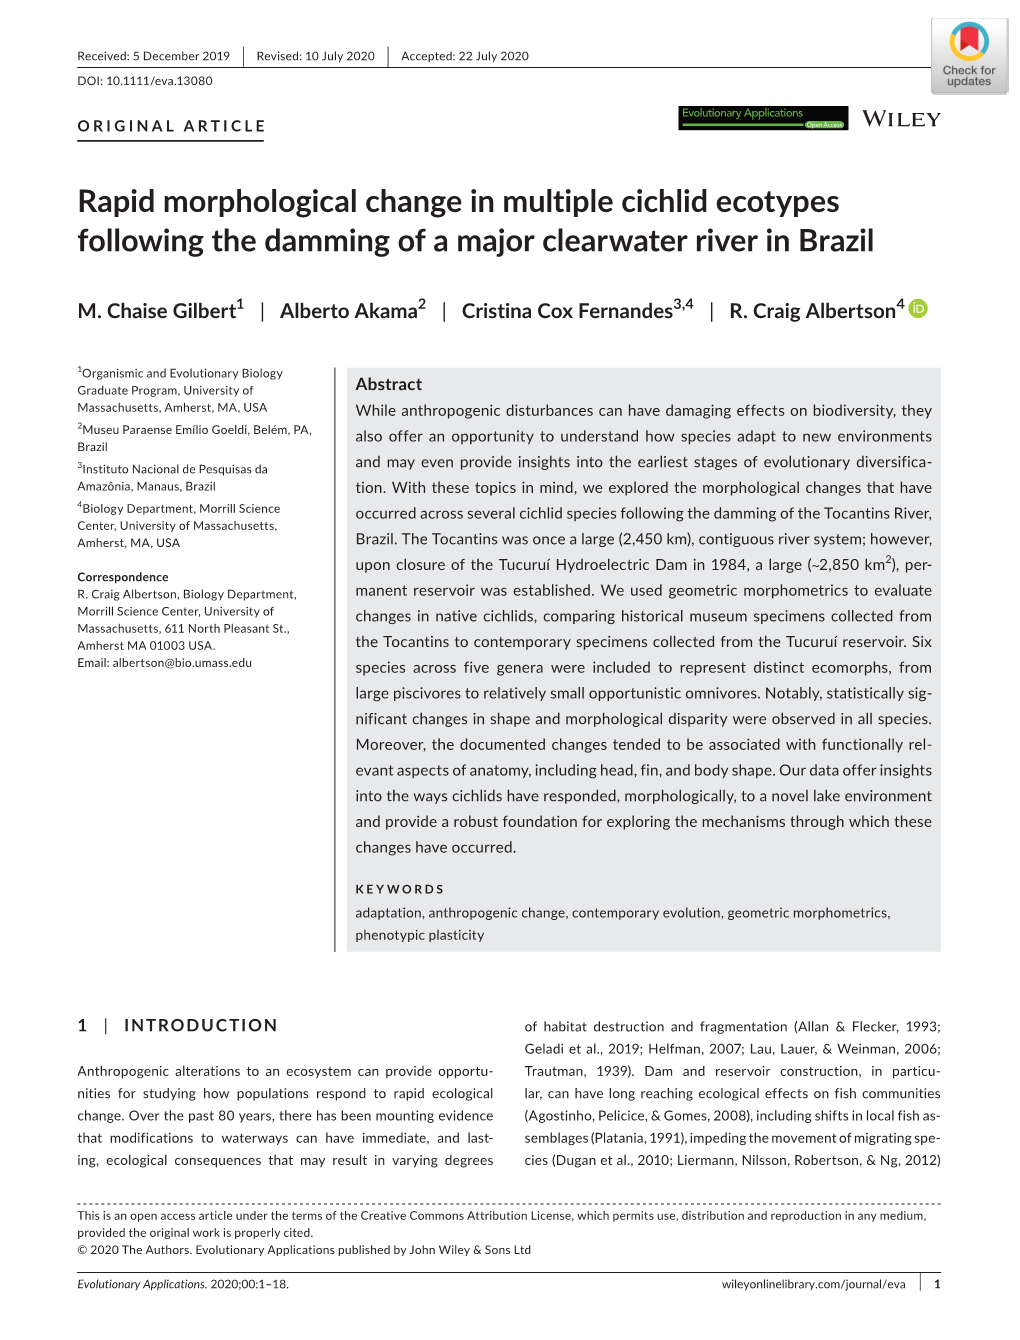 Rapid Morphological Change in Multiple Cichlid Ecotypes Following the Damming of a Major Clearwater River in Brazil